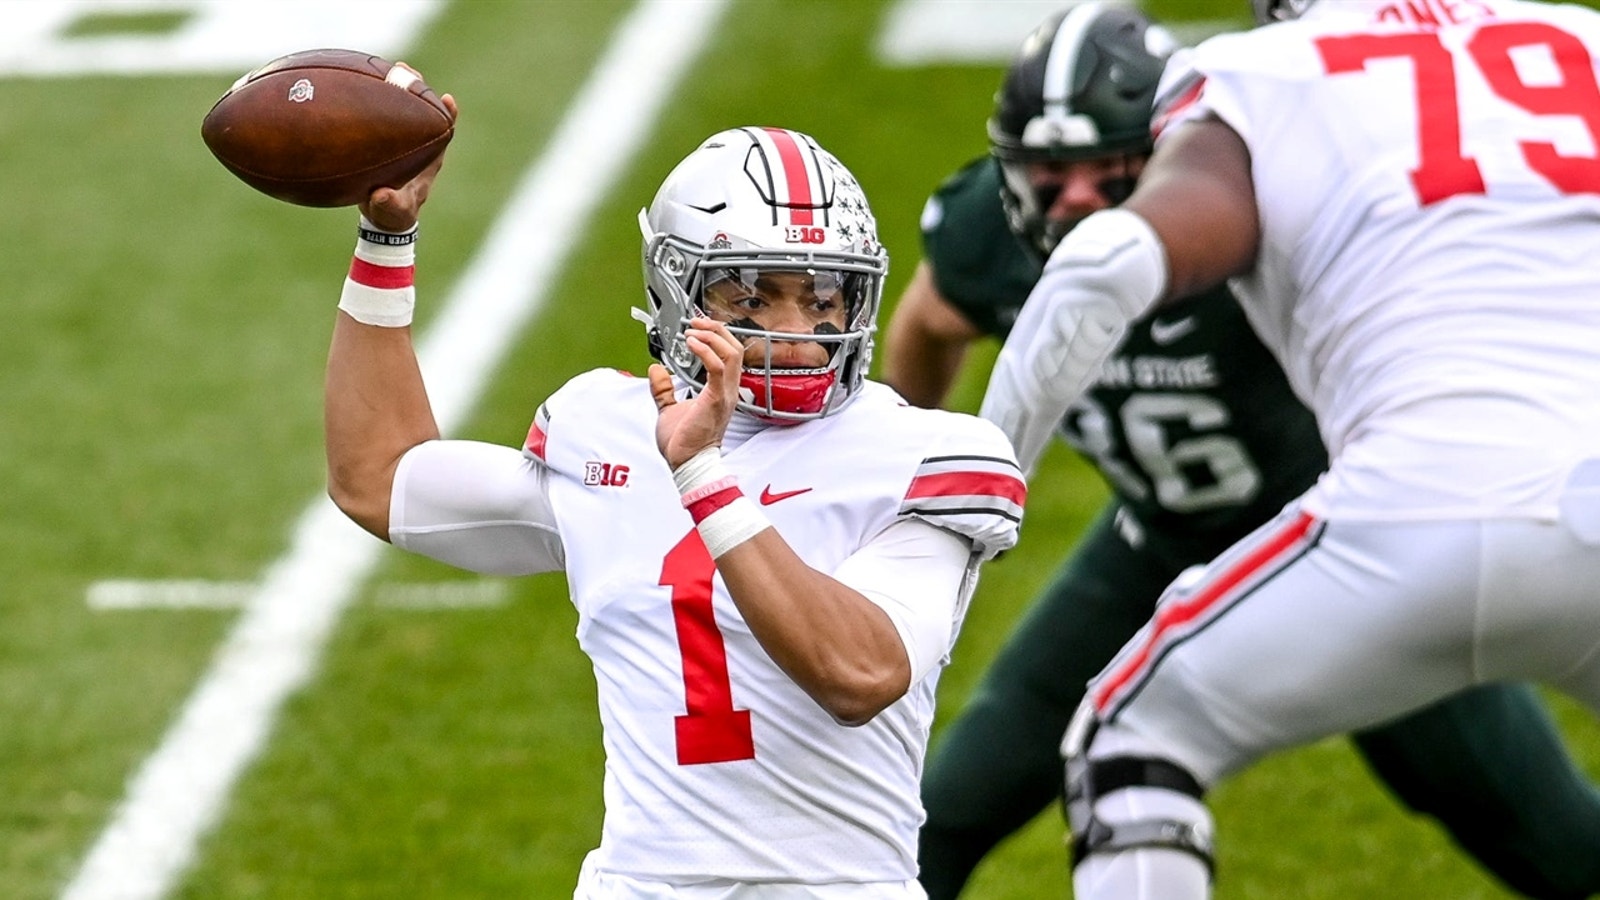 Justin Fields leads No. 4 Ohio State past Michigan State with four total touchdowns, 52-12